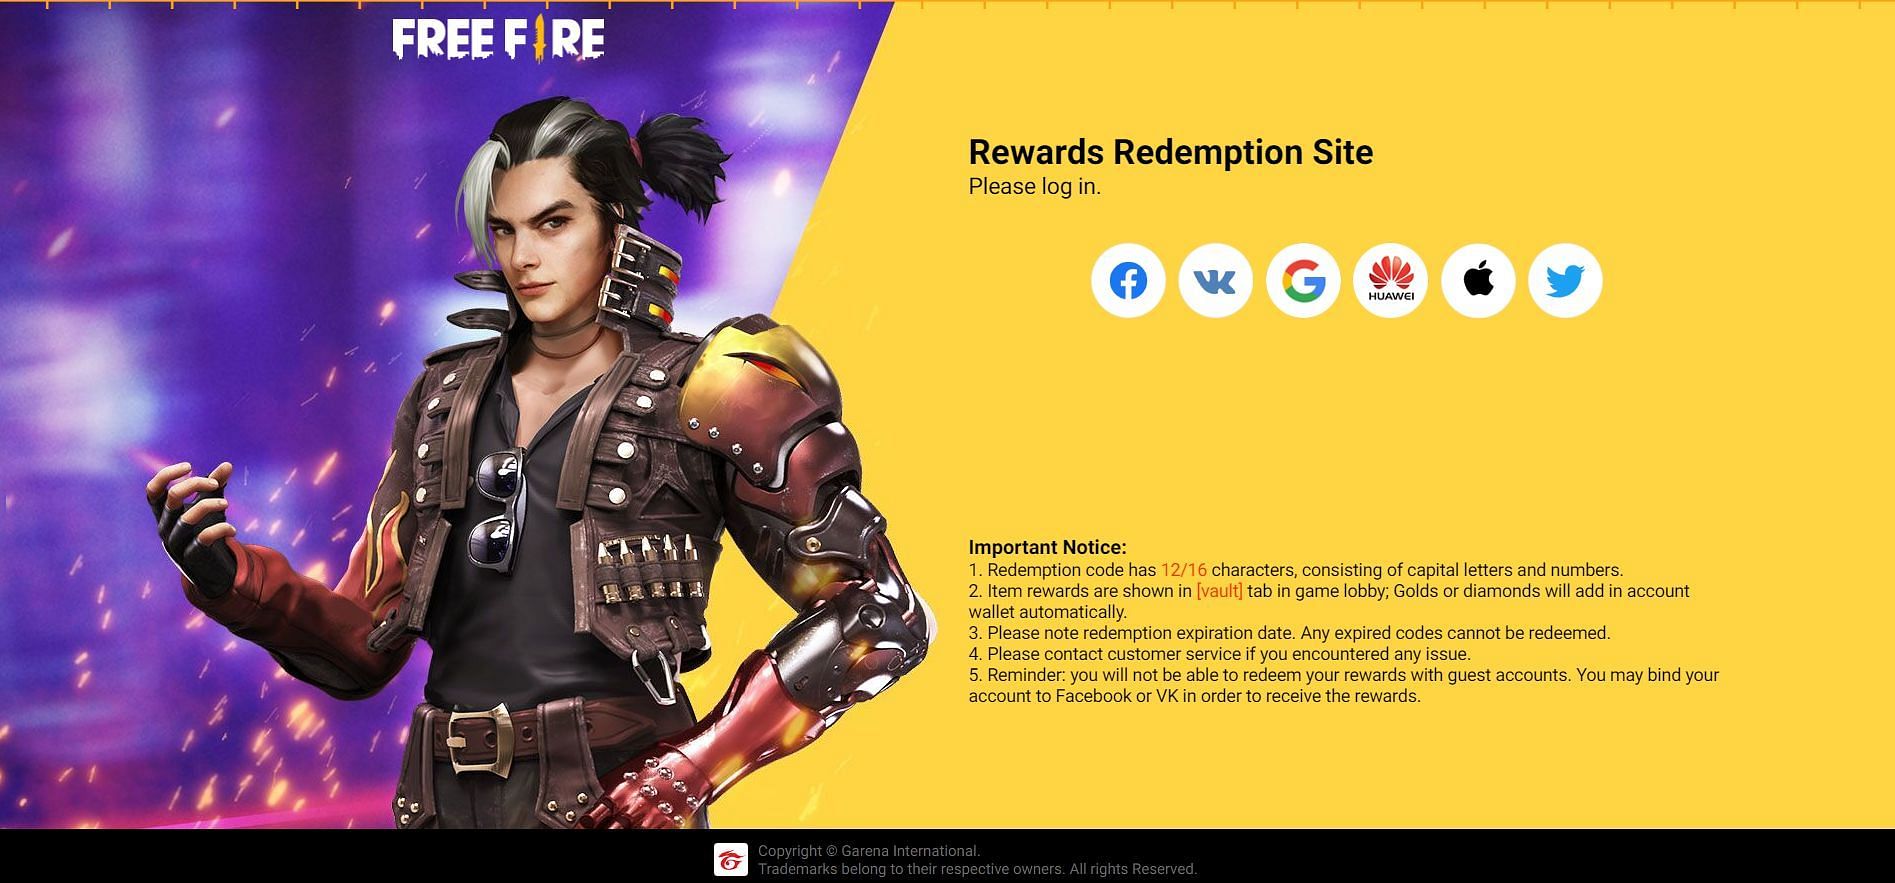 Only the valid/active redemption codes will work (Image via Garena)